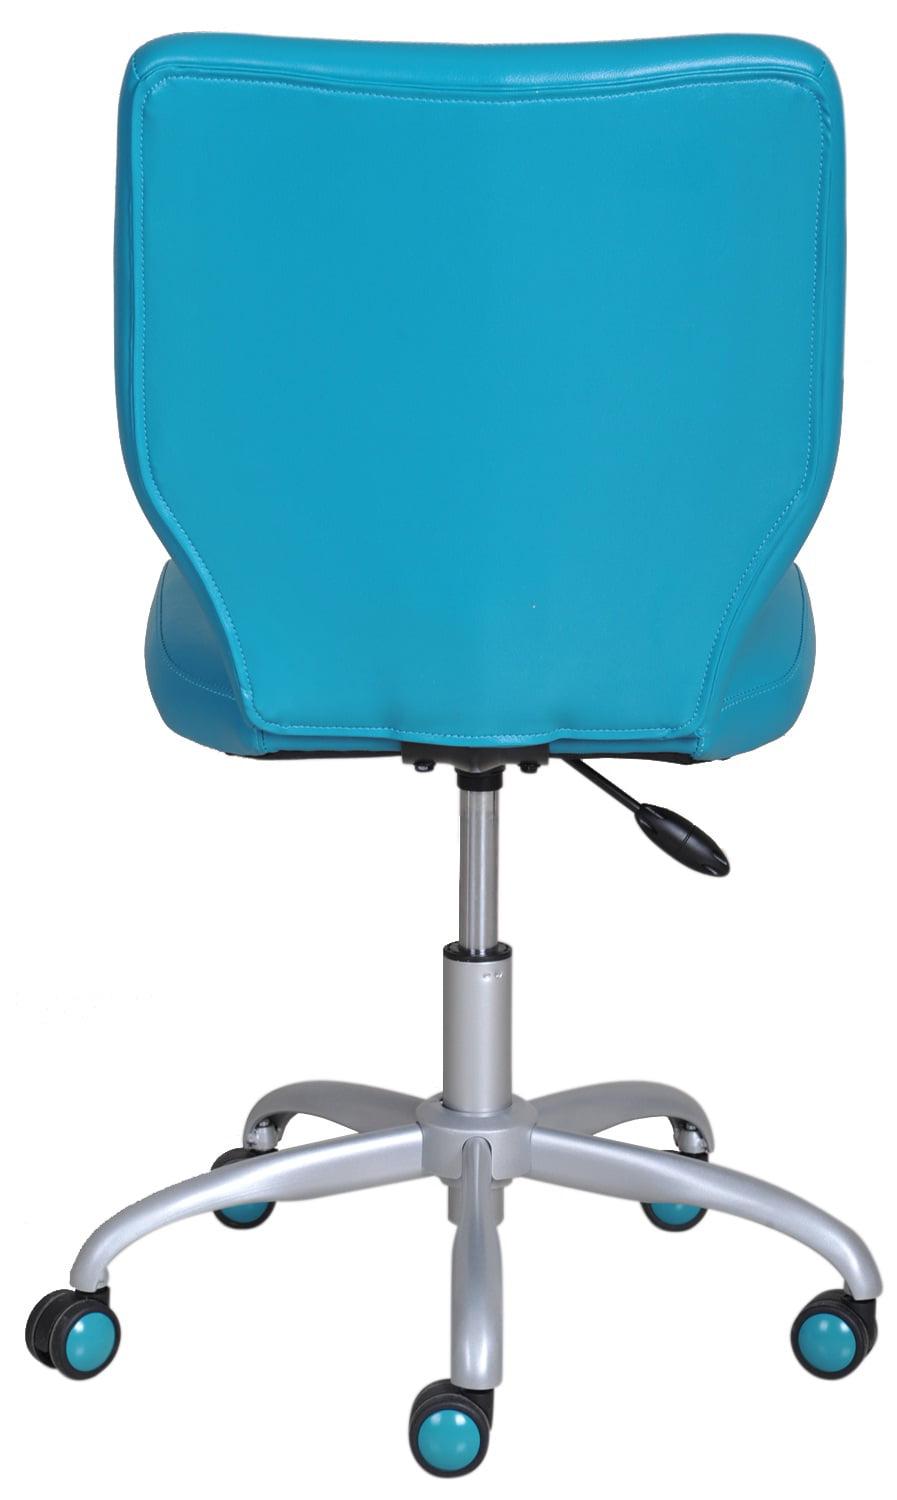 Office Chairs In Teal Chair Design